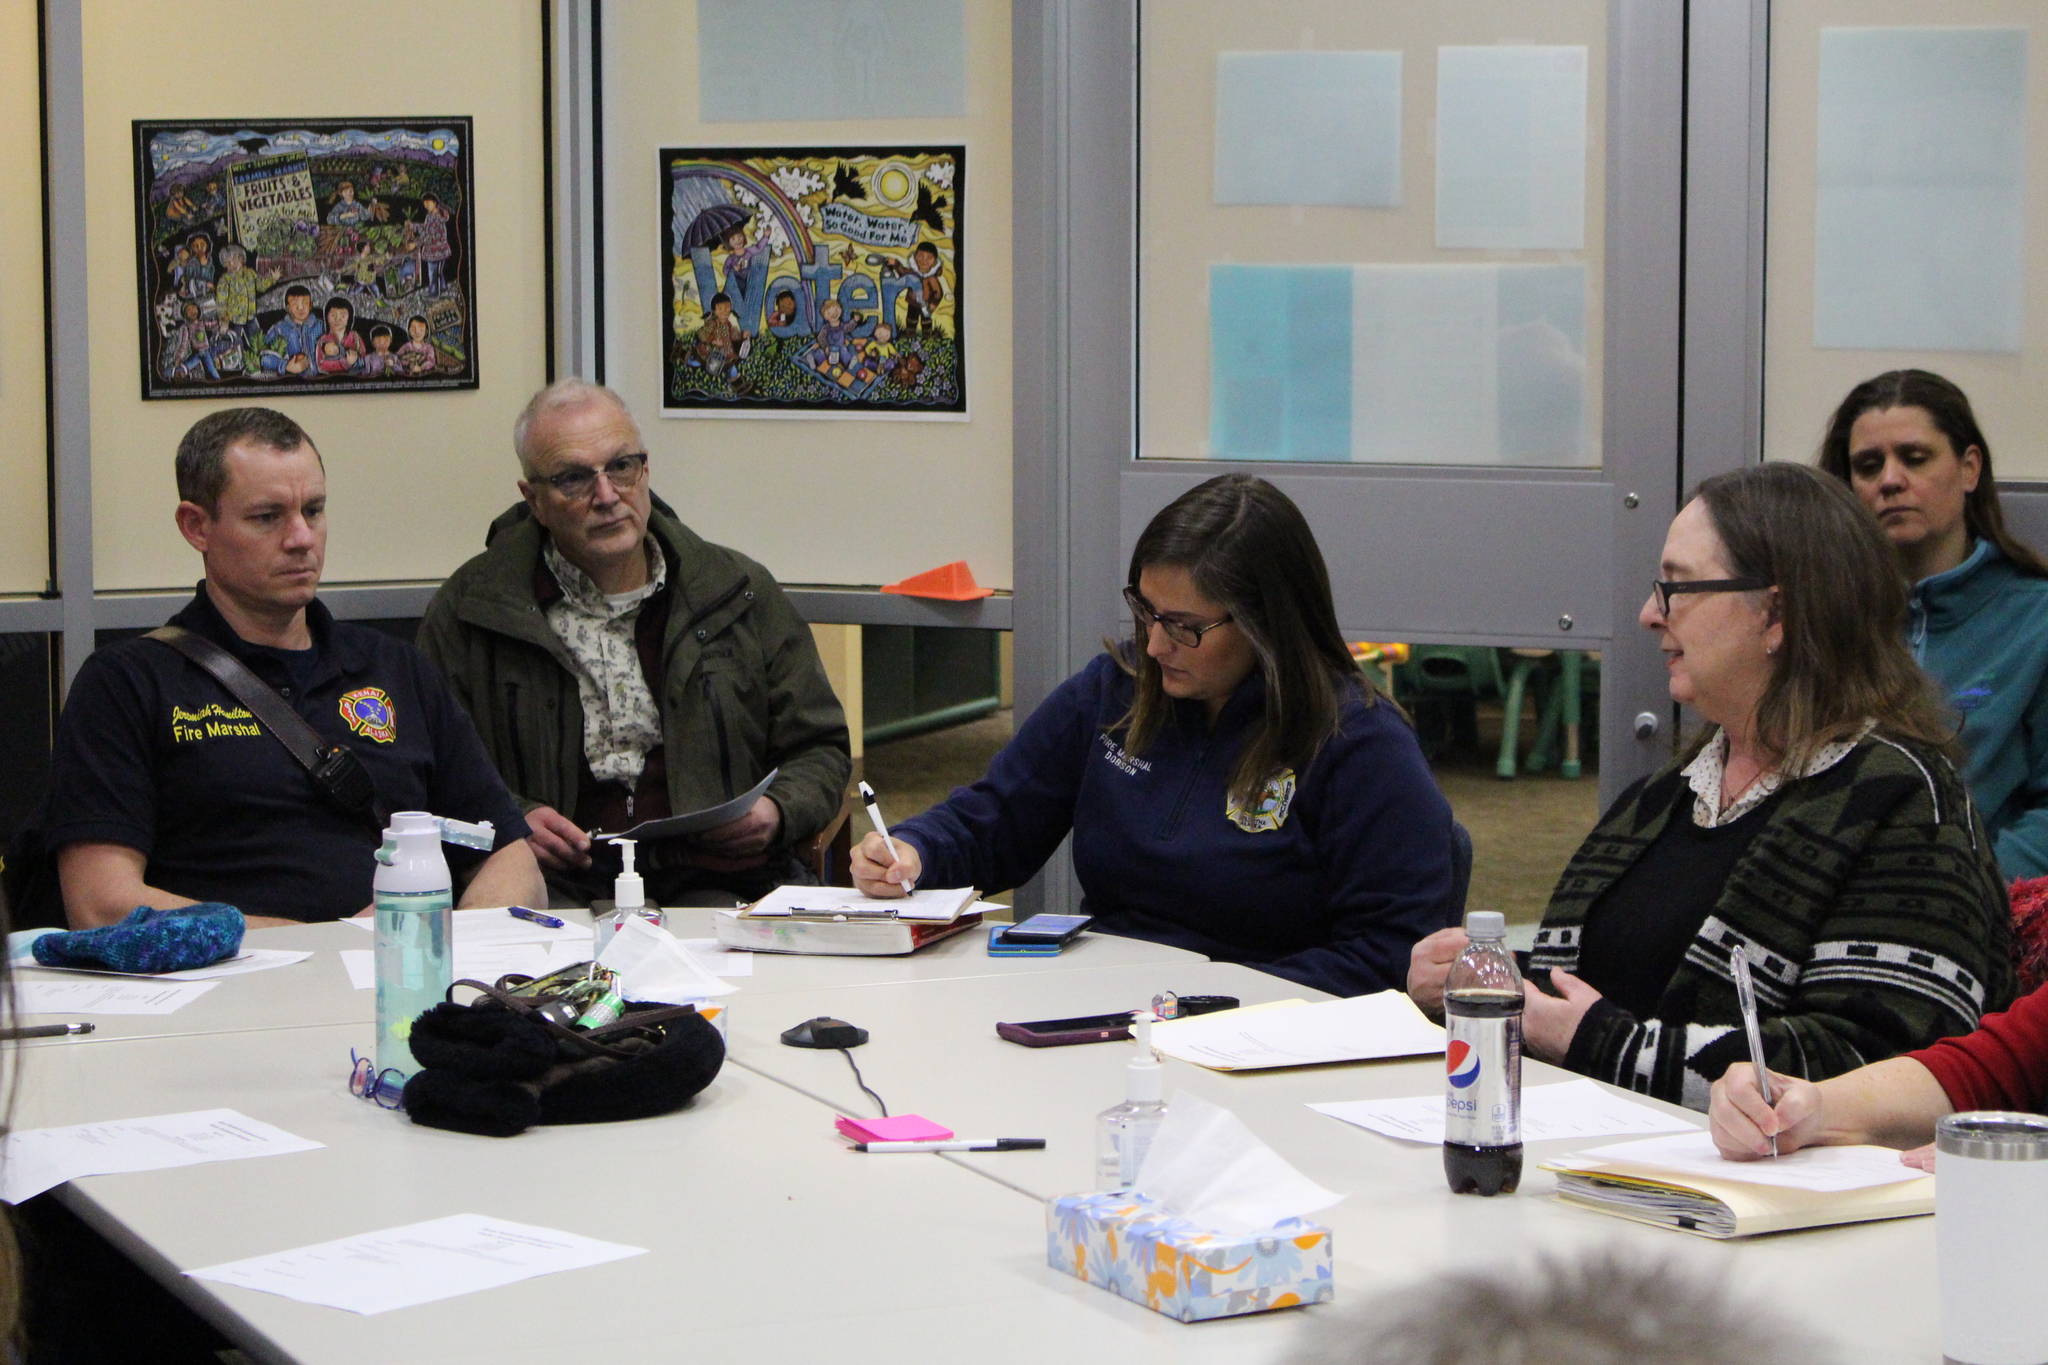 Fire Marshals Jeremy Hamilton, left, and Brooke Dobson, center right, meet with members of the Shelter Development Workgroup at the Kenai Public Health Center in Kenai, Alaska on Jan. 8, 2020. (Photo by Brian Mazurek/Peninsula Clarion)